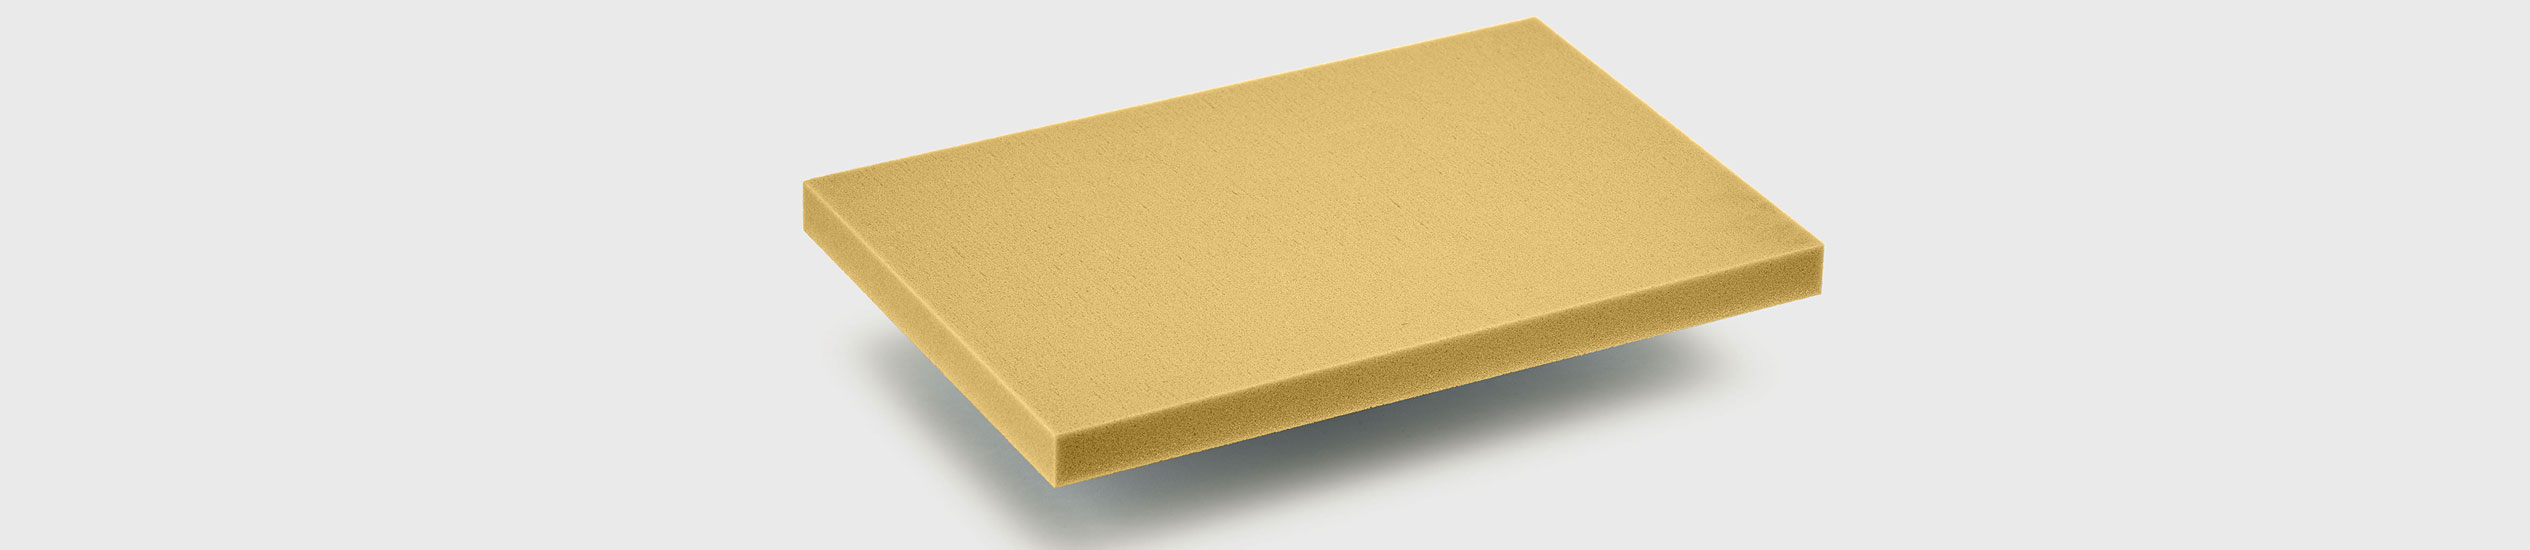 PVC foam offers optimal stiffness-to-weight-ratio, good impact strength , water resistance, thermal insulation, low resin absorption and high fatigue resistance